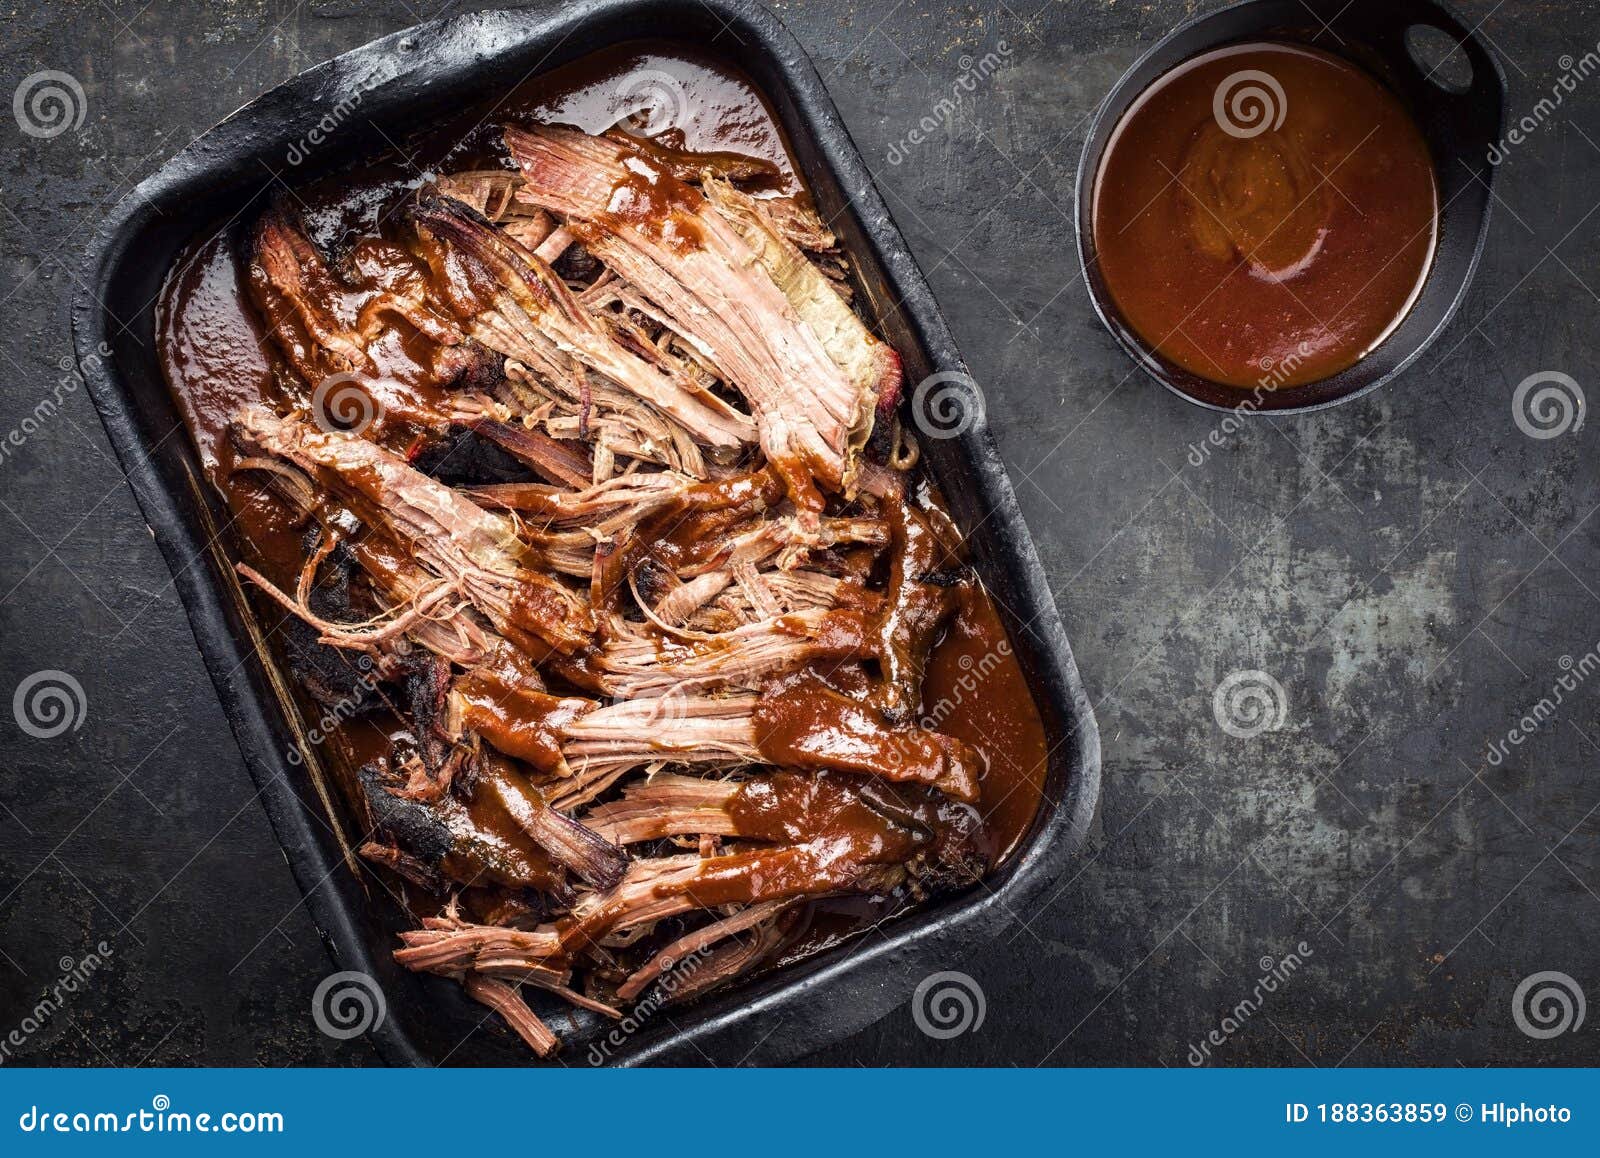 Traditional Barbecue Wagyu Torn To Bits Pulled Beef In Hot Chili Sauce In A Roasting Dish On A Rustic Board Stock Image Image Of Meal Bits 188363859